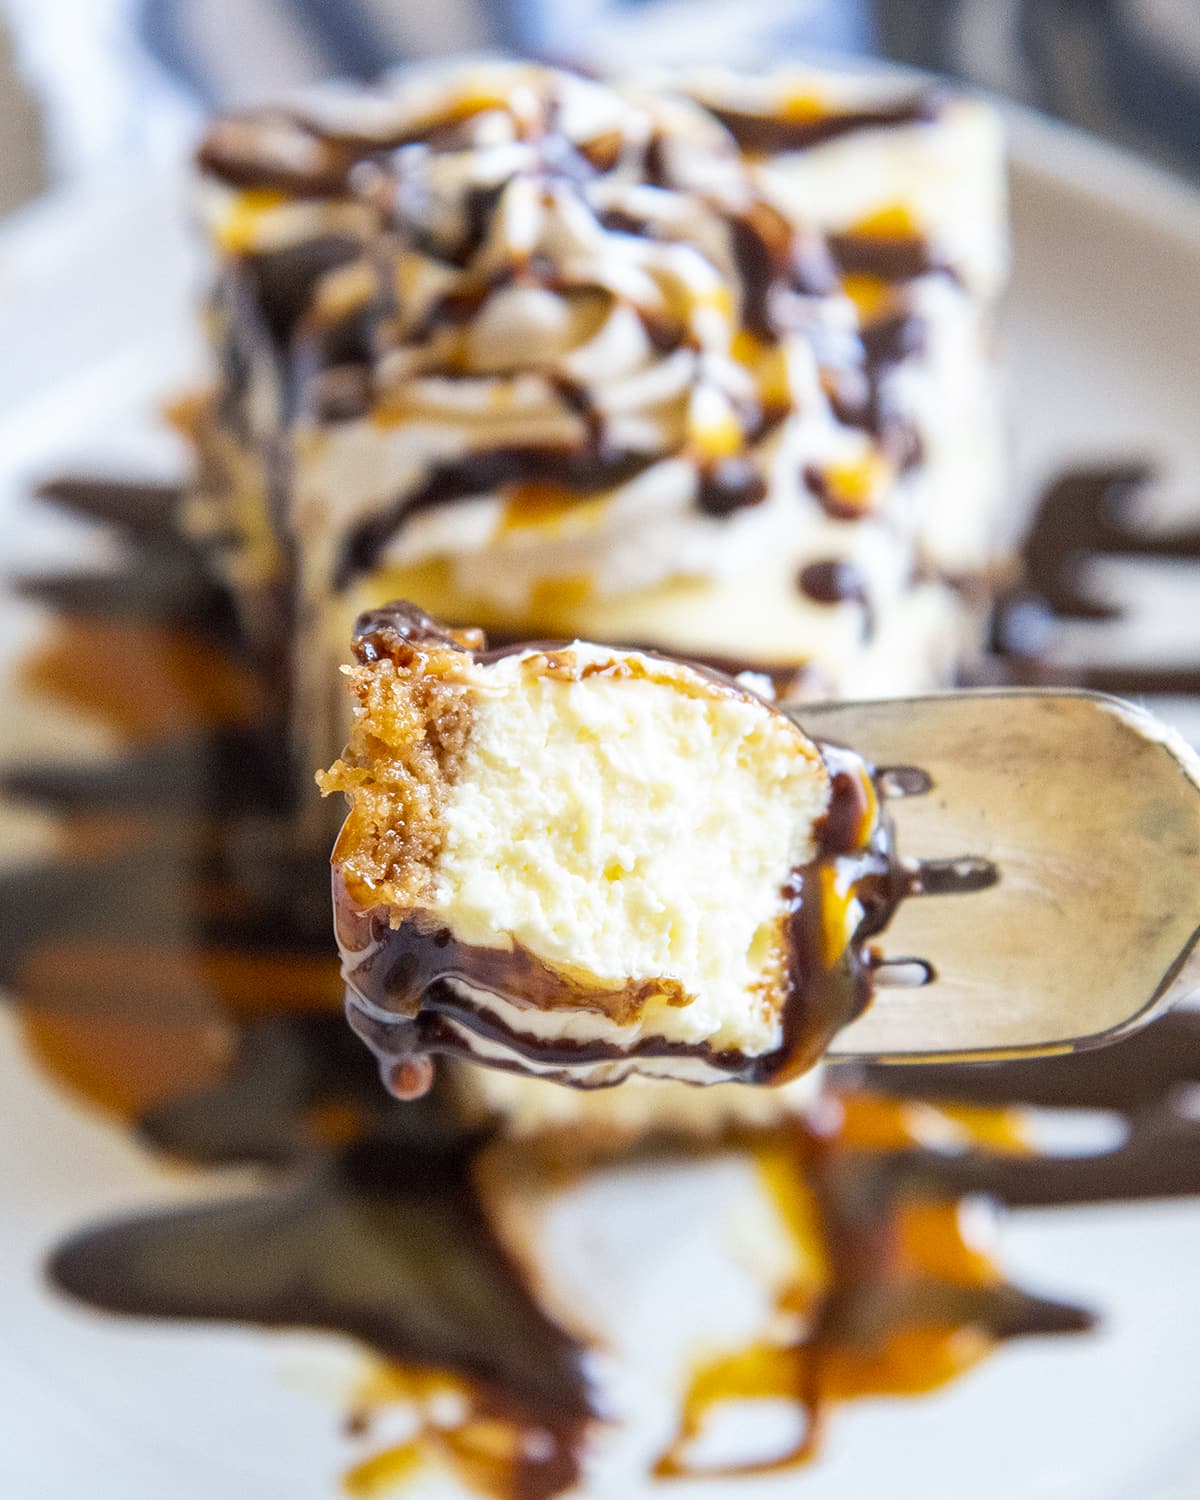 A bite of cheesecake on a fork topped with caramel and chocolate syrup.